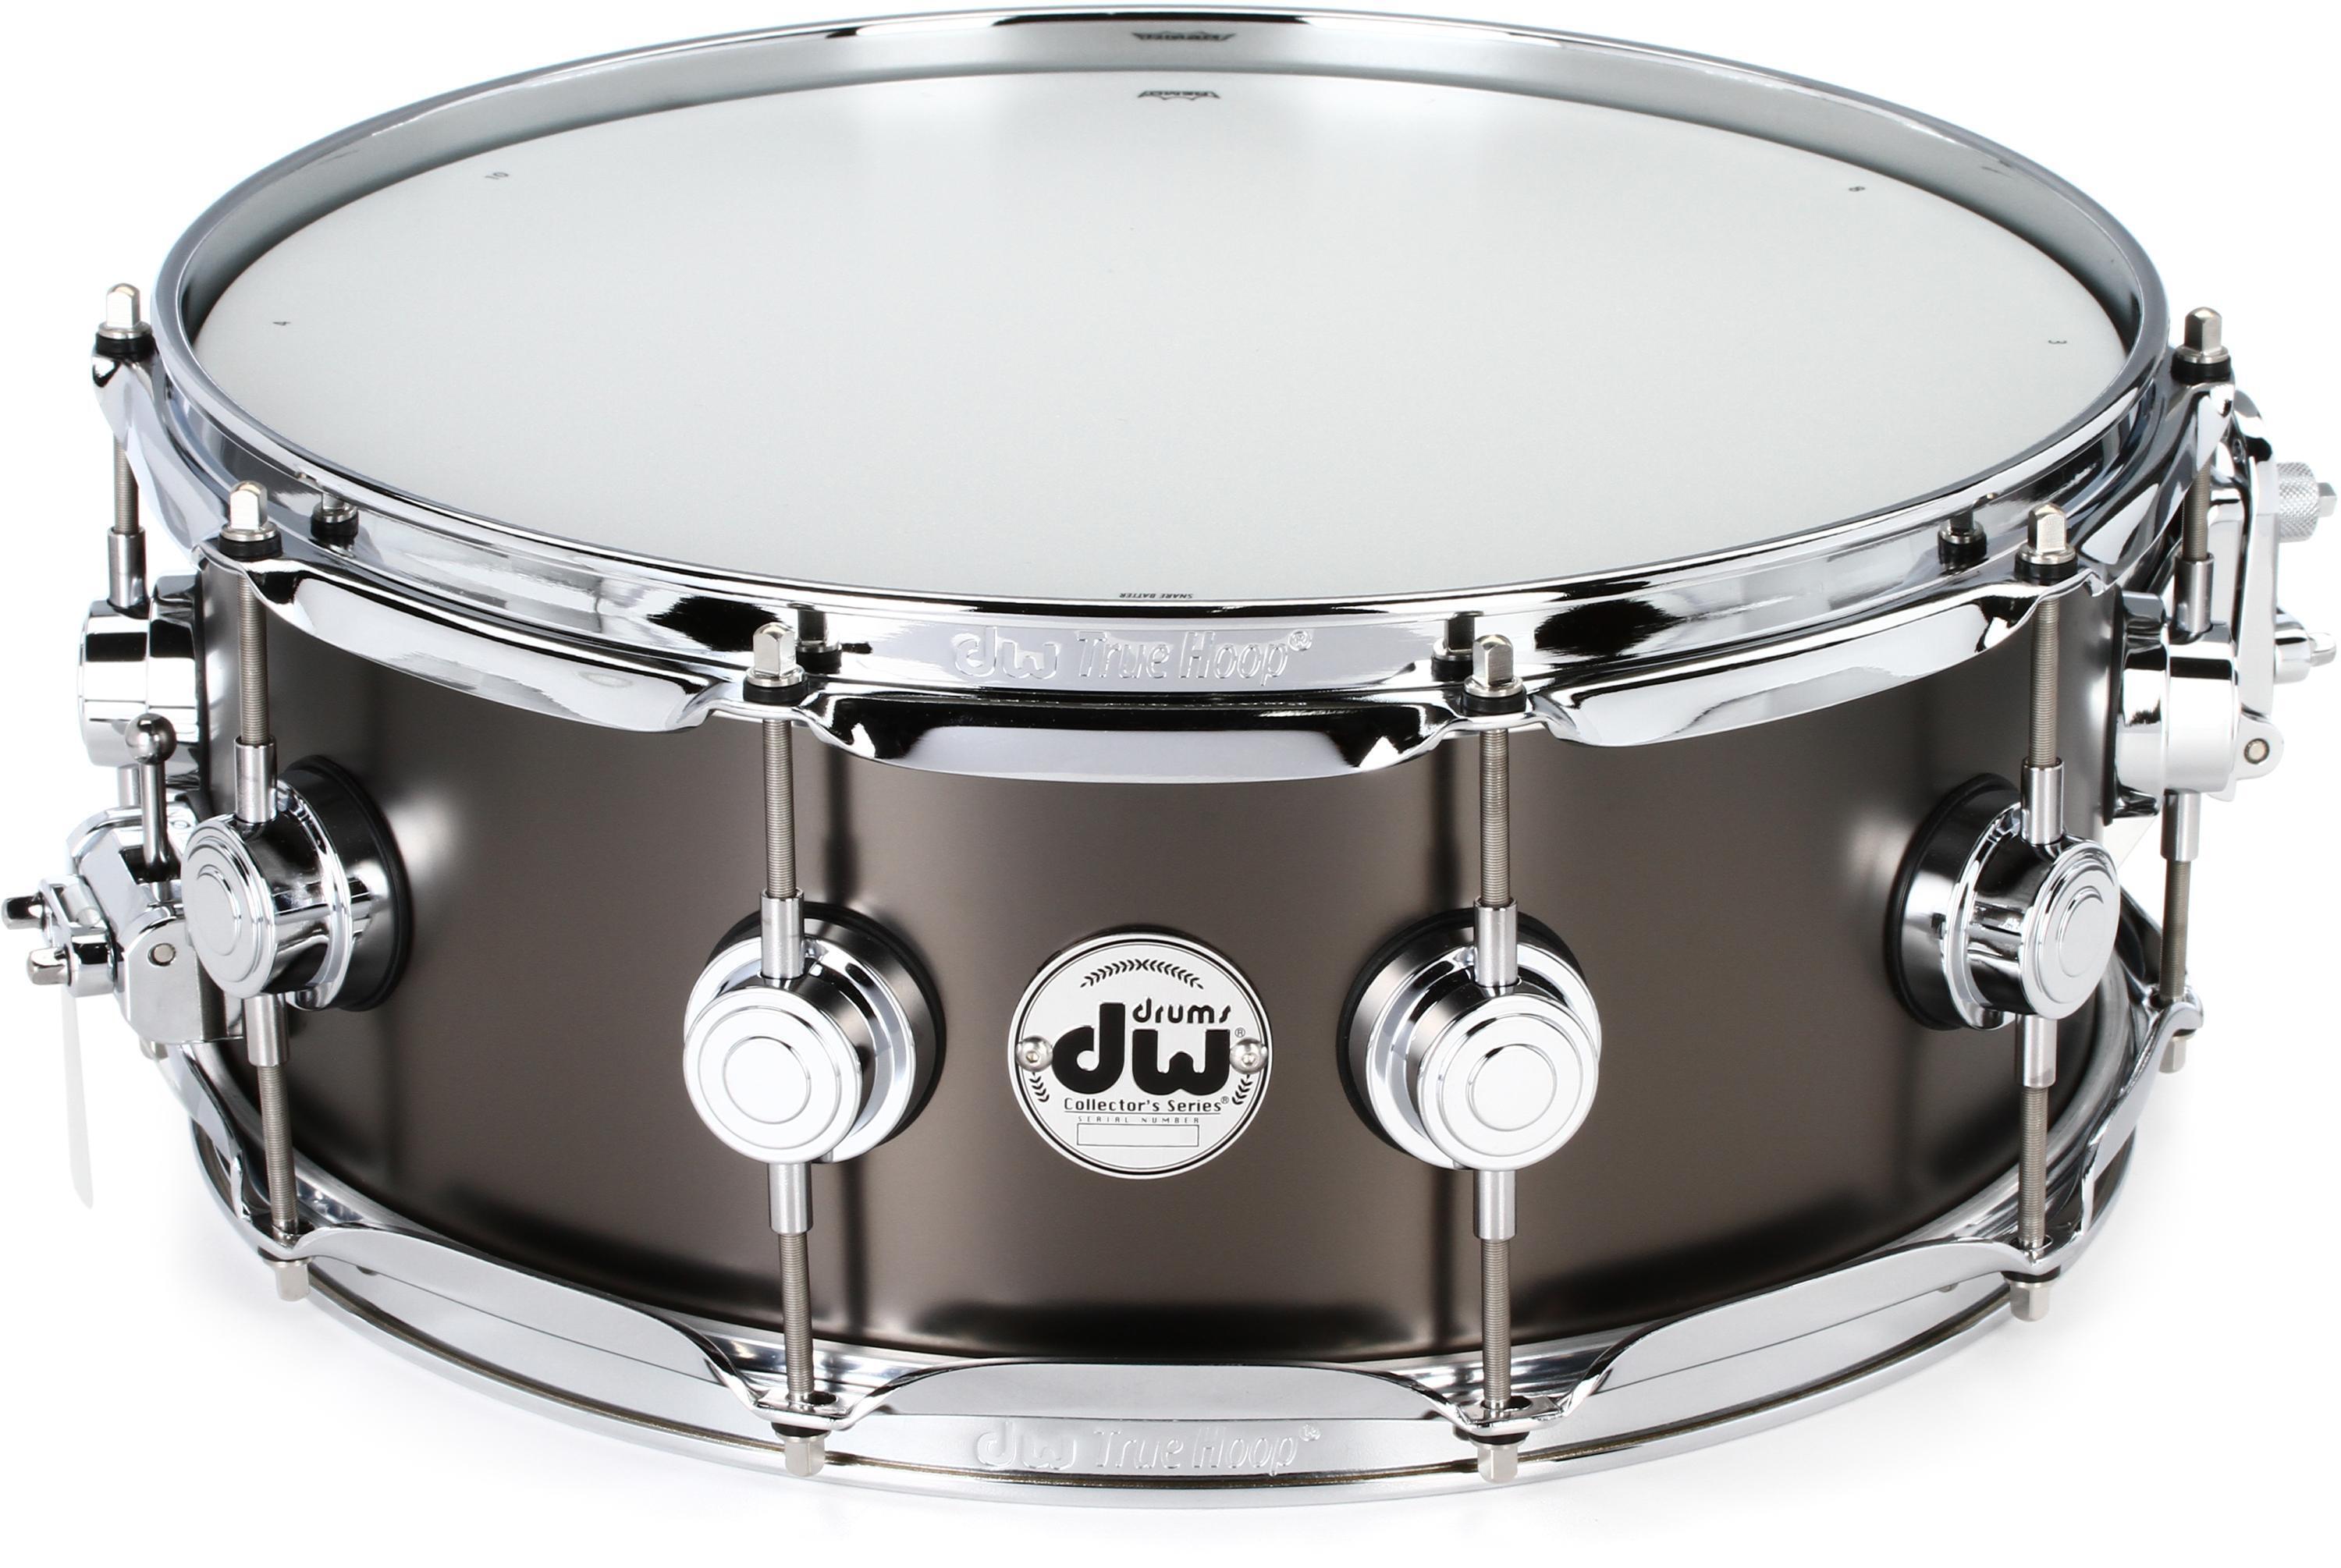 DW Collector's Series Metal Brass Snare Drum - 5.5 x 14-inch 